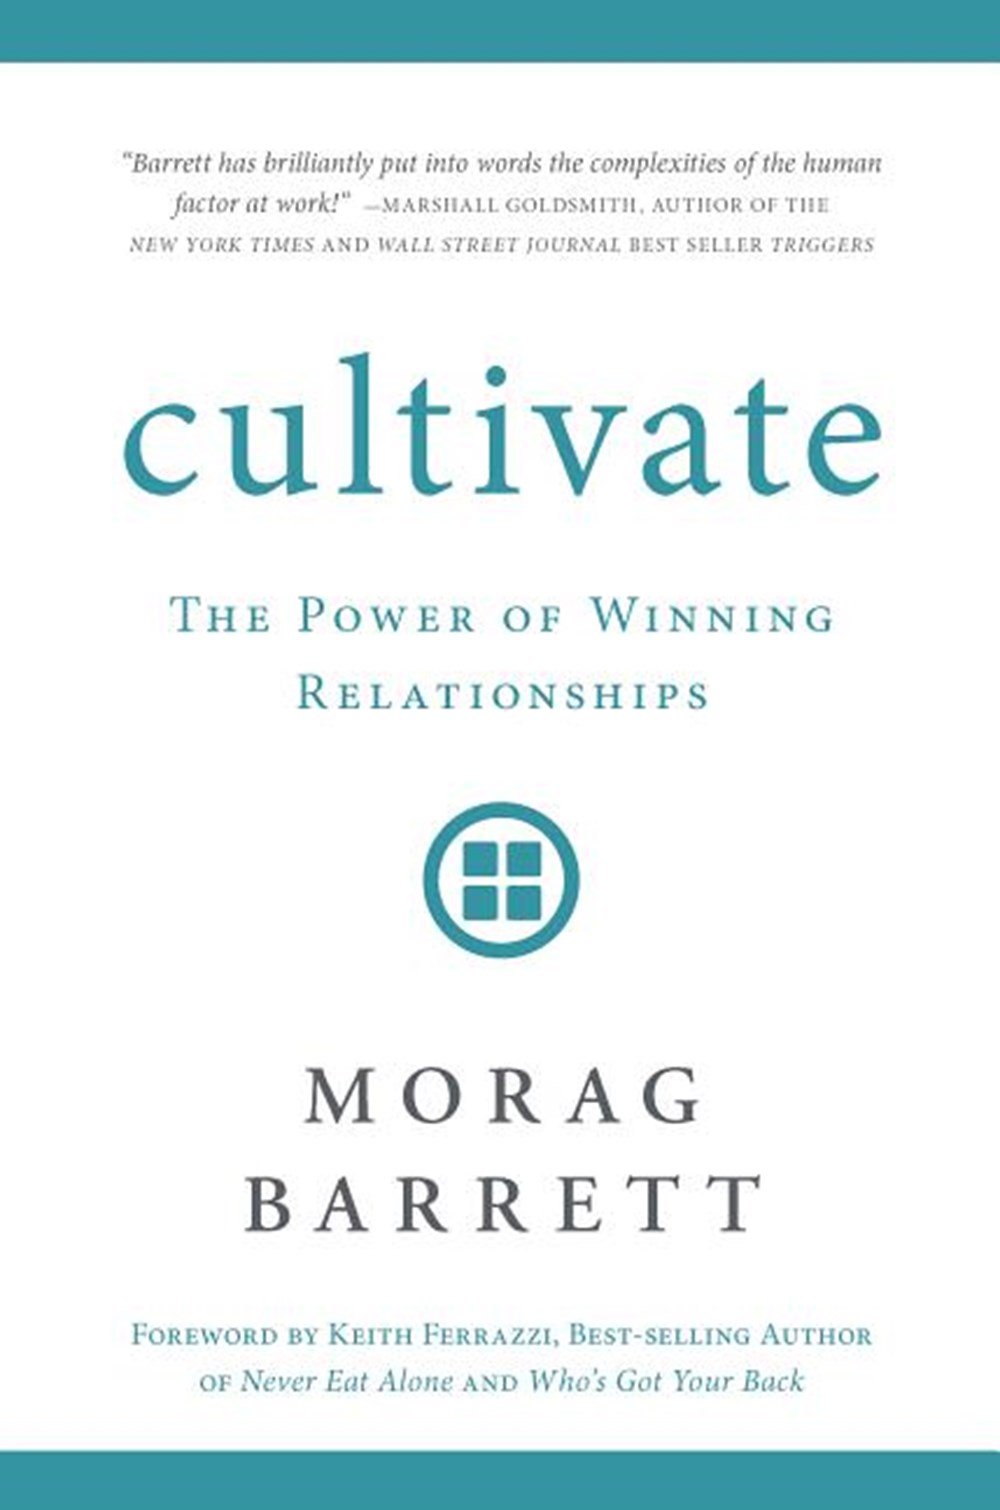 Cultivate The Power of Winning Relationships